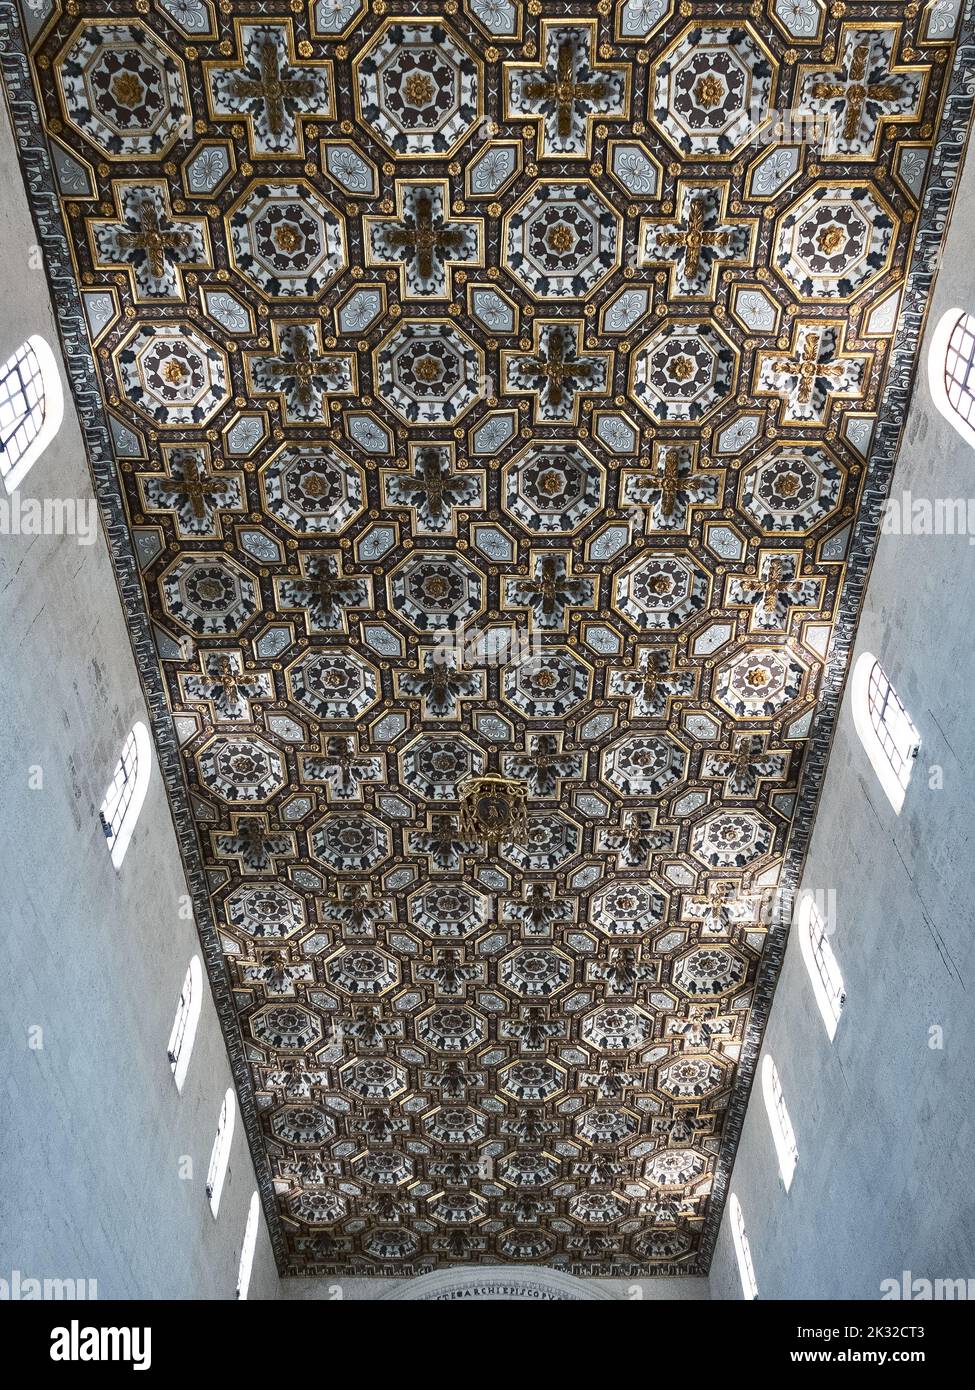 Cathedral of Otranto (Lecce, Puglia, Italy). Lacunar ceiling with gilding on a black and white background built in 1698. Stock Photo